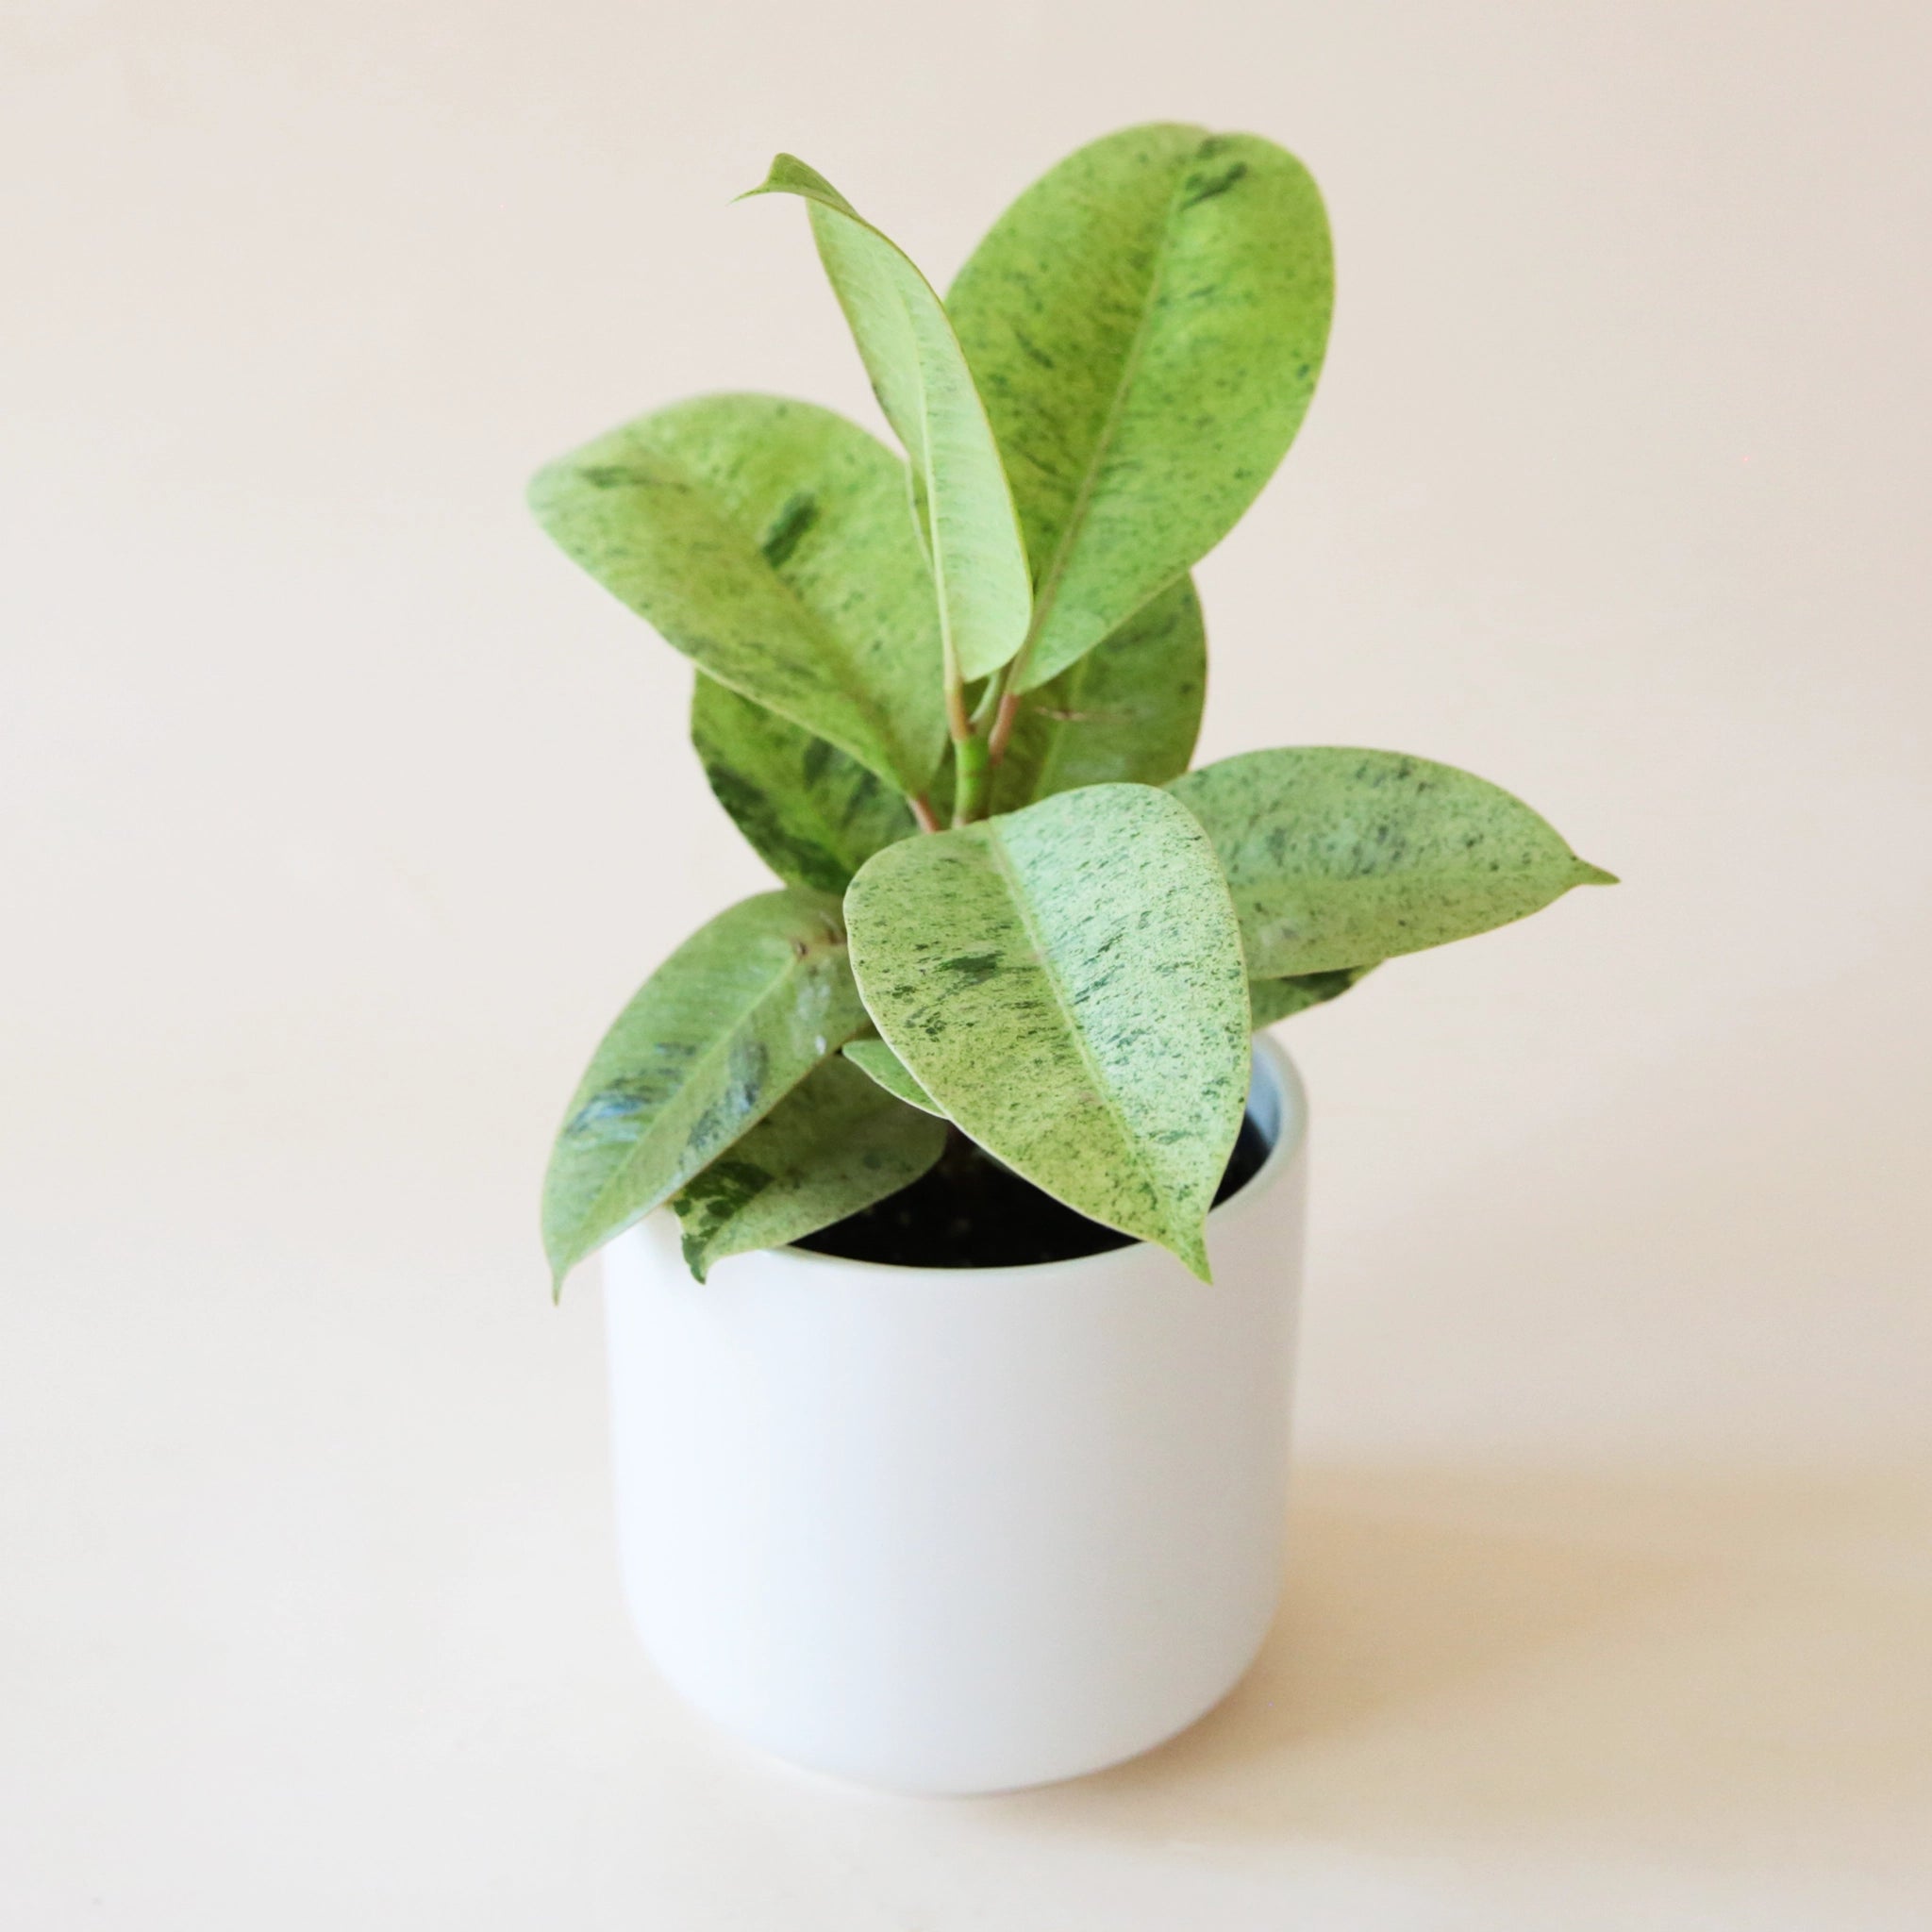 n a cream background is a Ficus Shiverieana with green leaves and photographed in a white ceramic planter